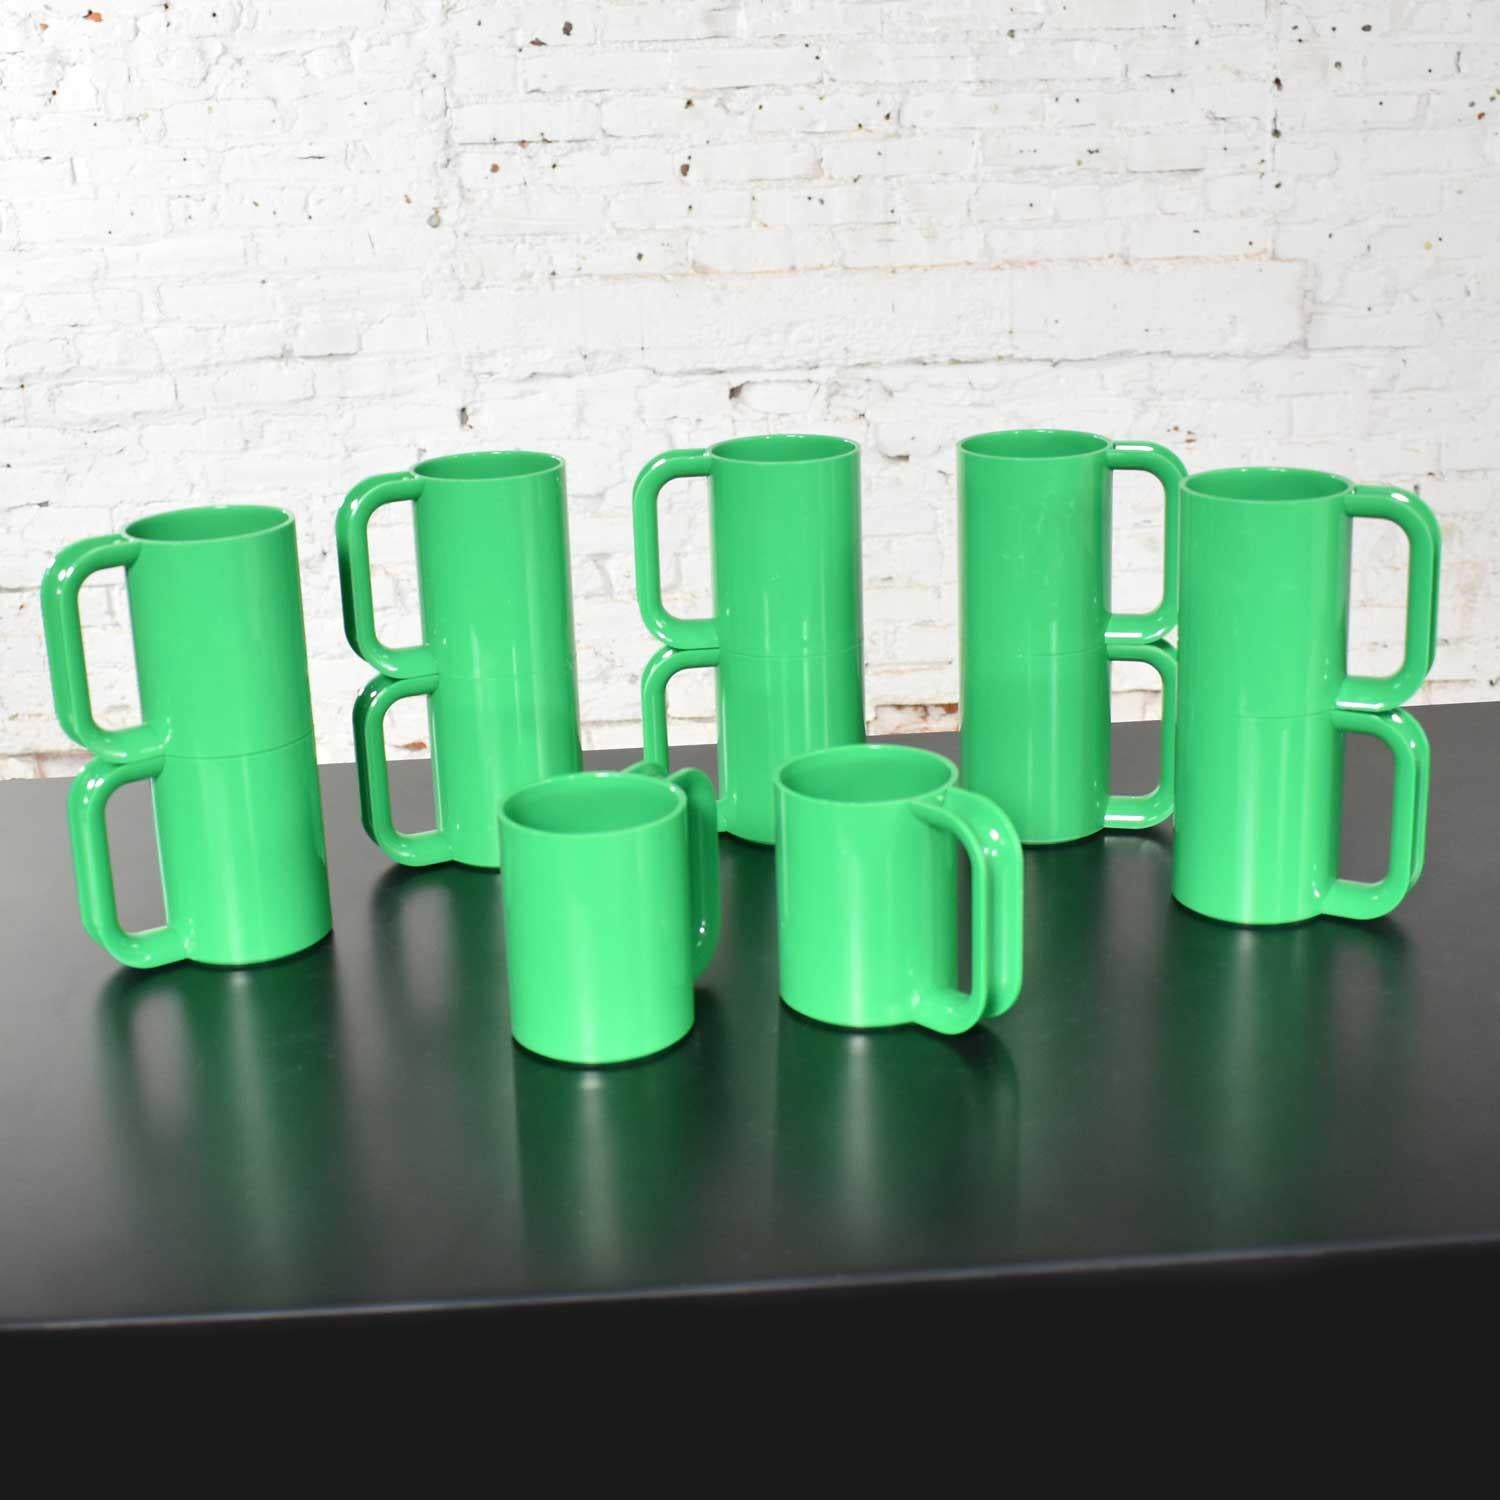 Heller Dinnerware by Lella & Massimo Vignelli in Kelly Green 58 Pieces & Napkins 5